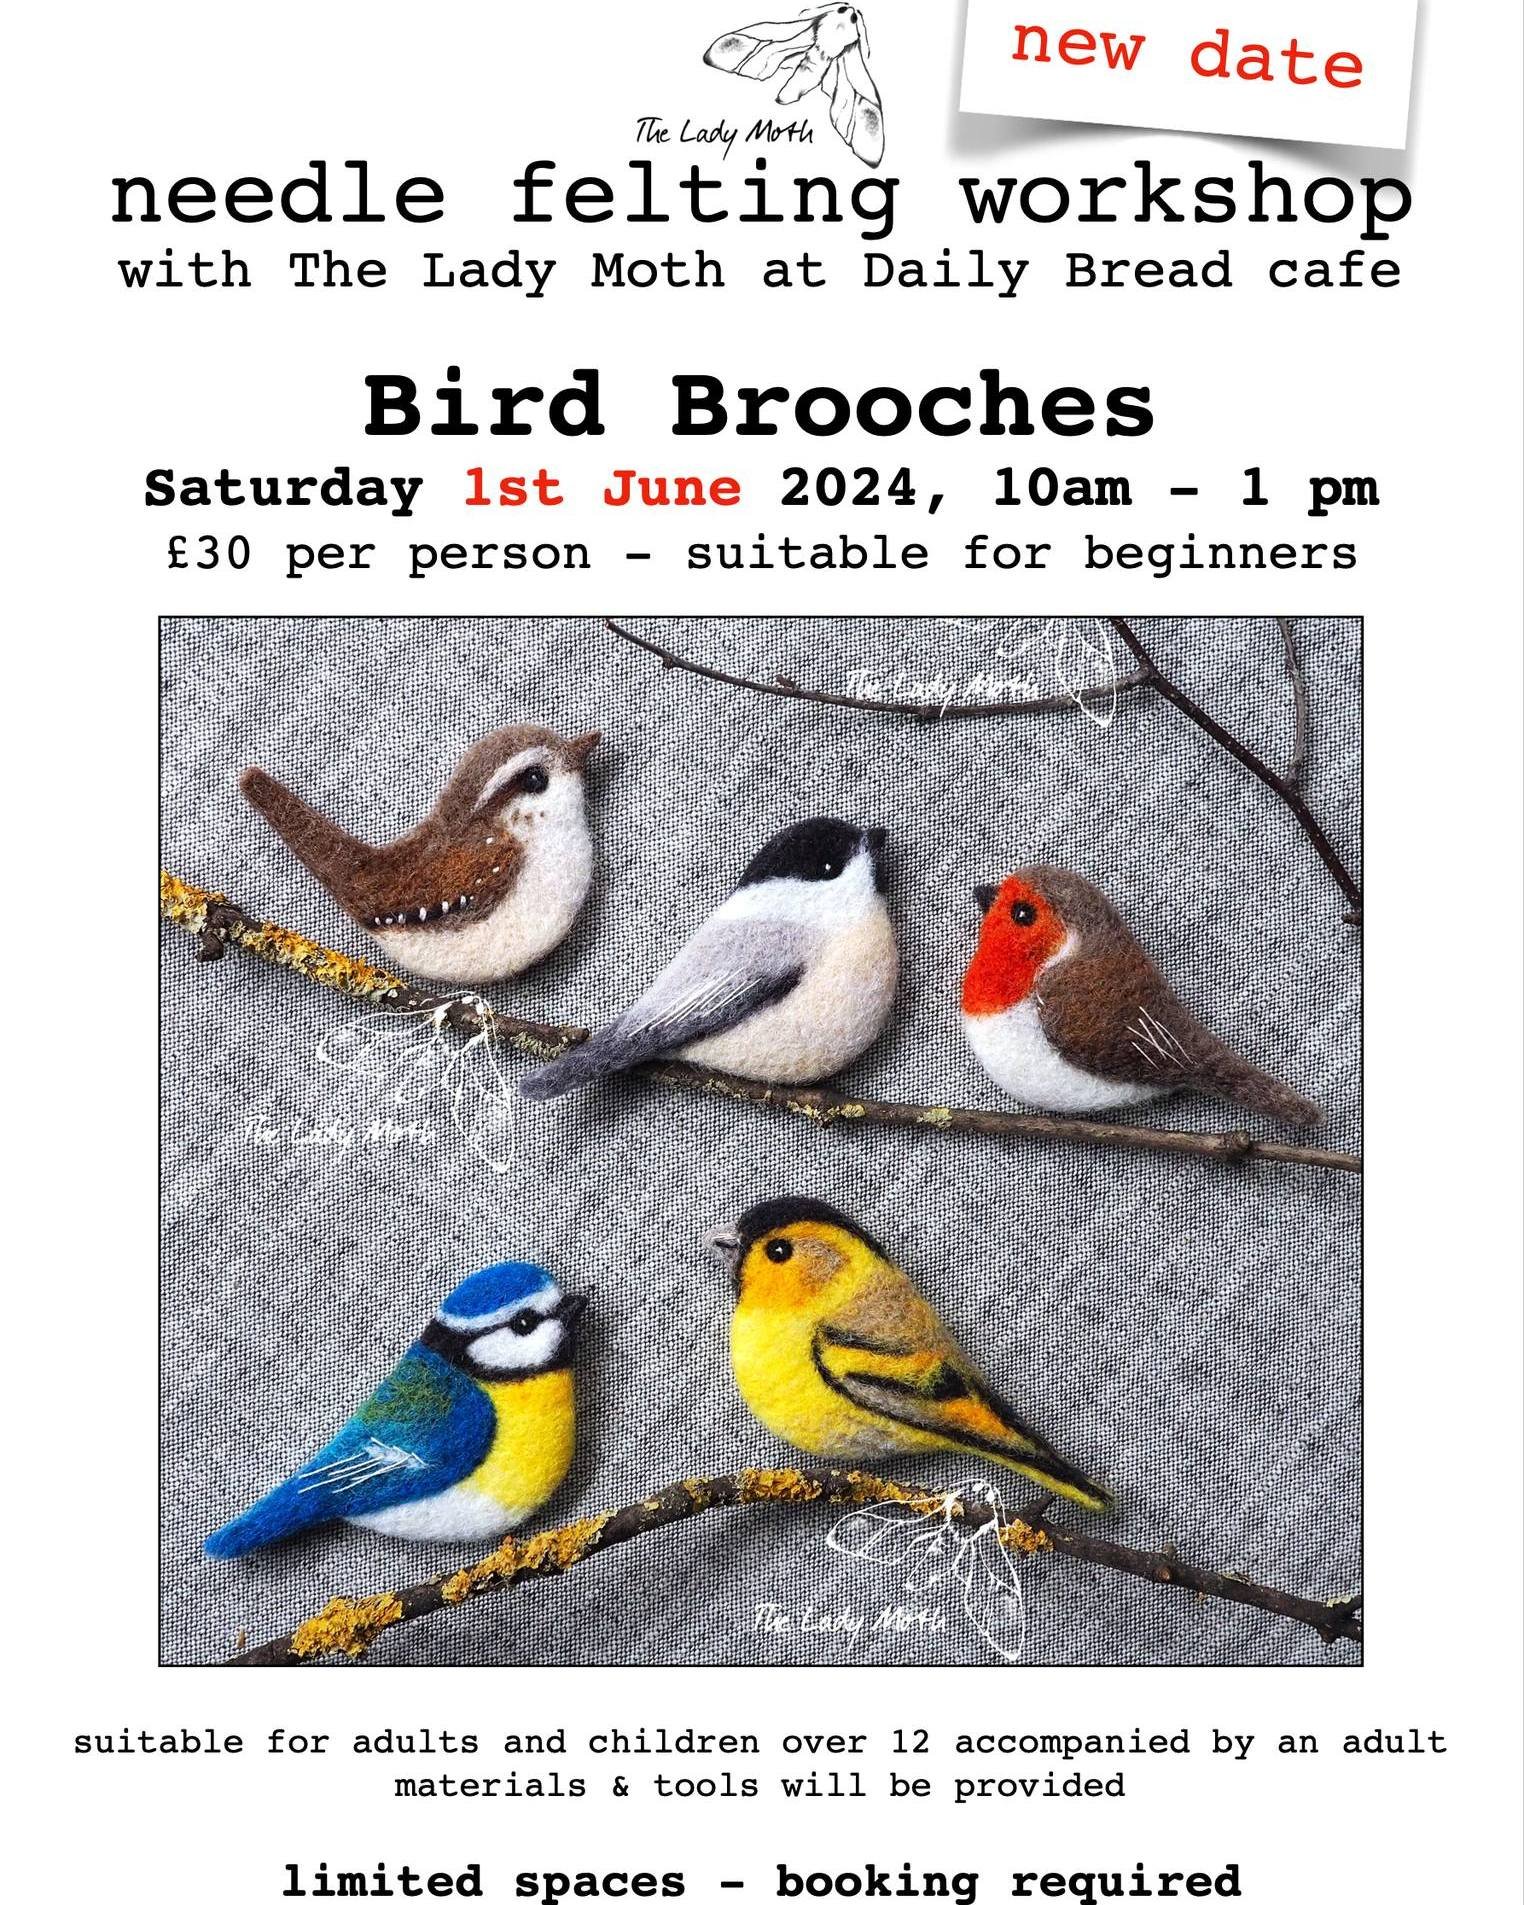 Due to high demand, the lovely The Lady Moth is adding another Bird Brooch workshop date! The spaces are limited, so book early to avoid disappointment! https://www.theladymoth.com/s/shop